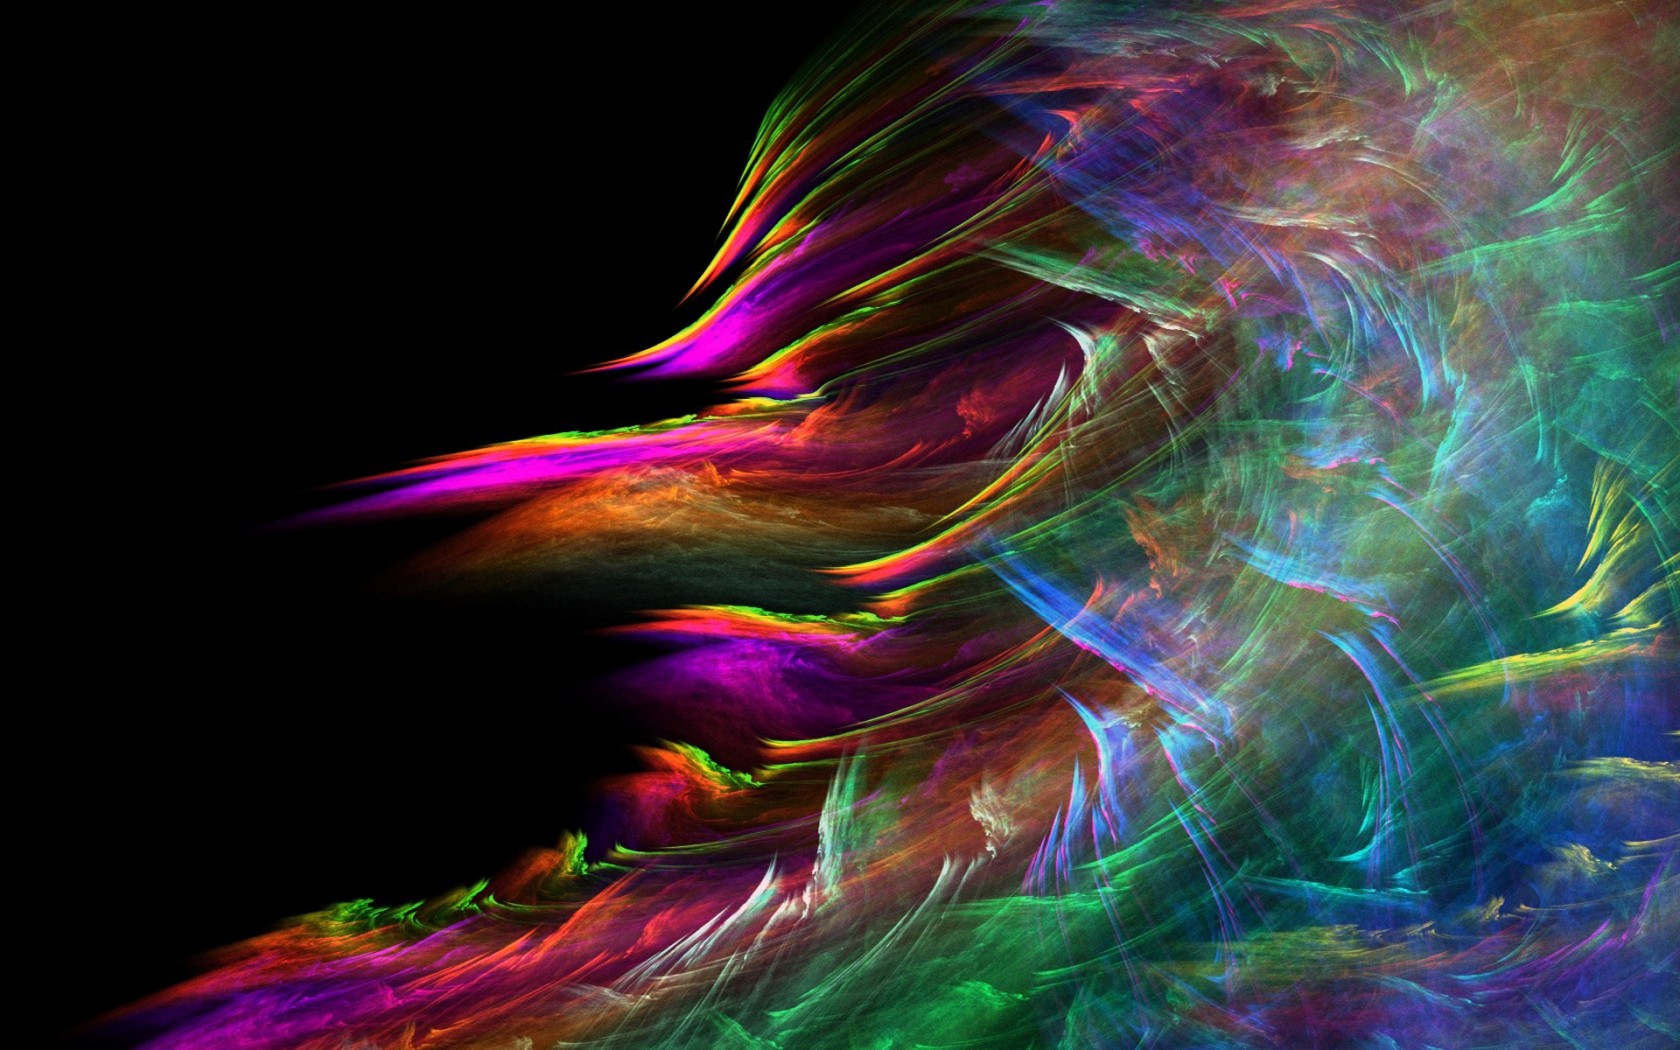  HQ Abstract Abstract 1680x1050 Wallpaper   HQ 1680x1050